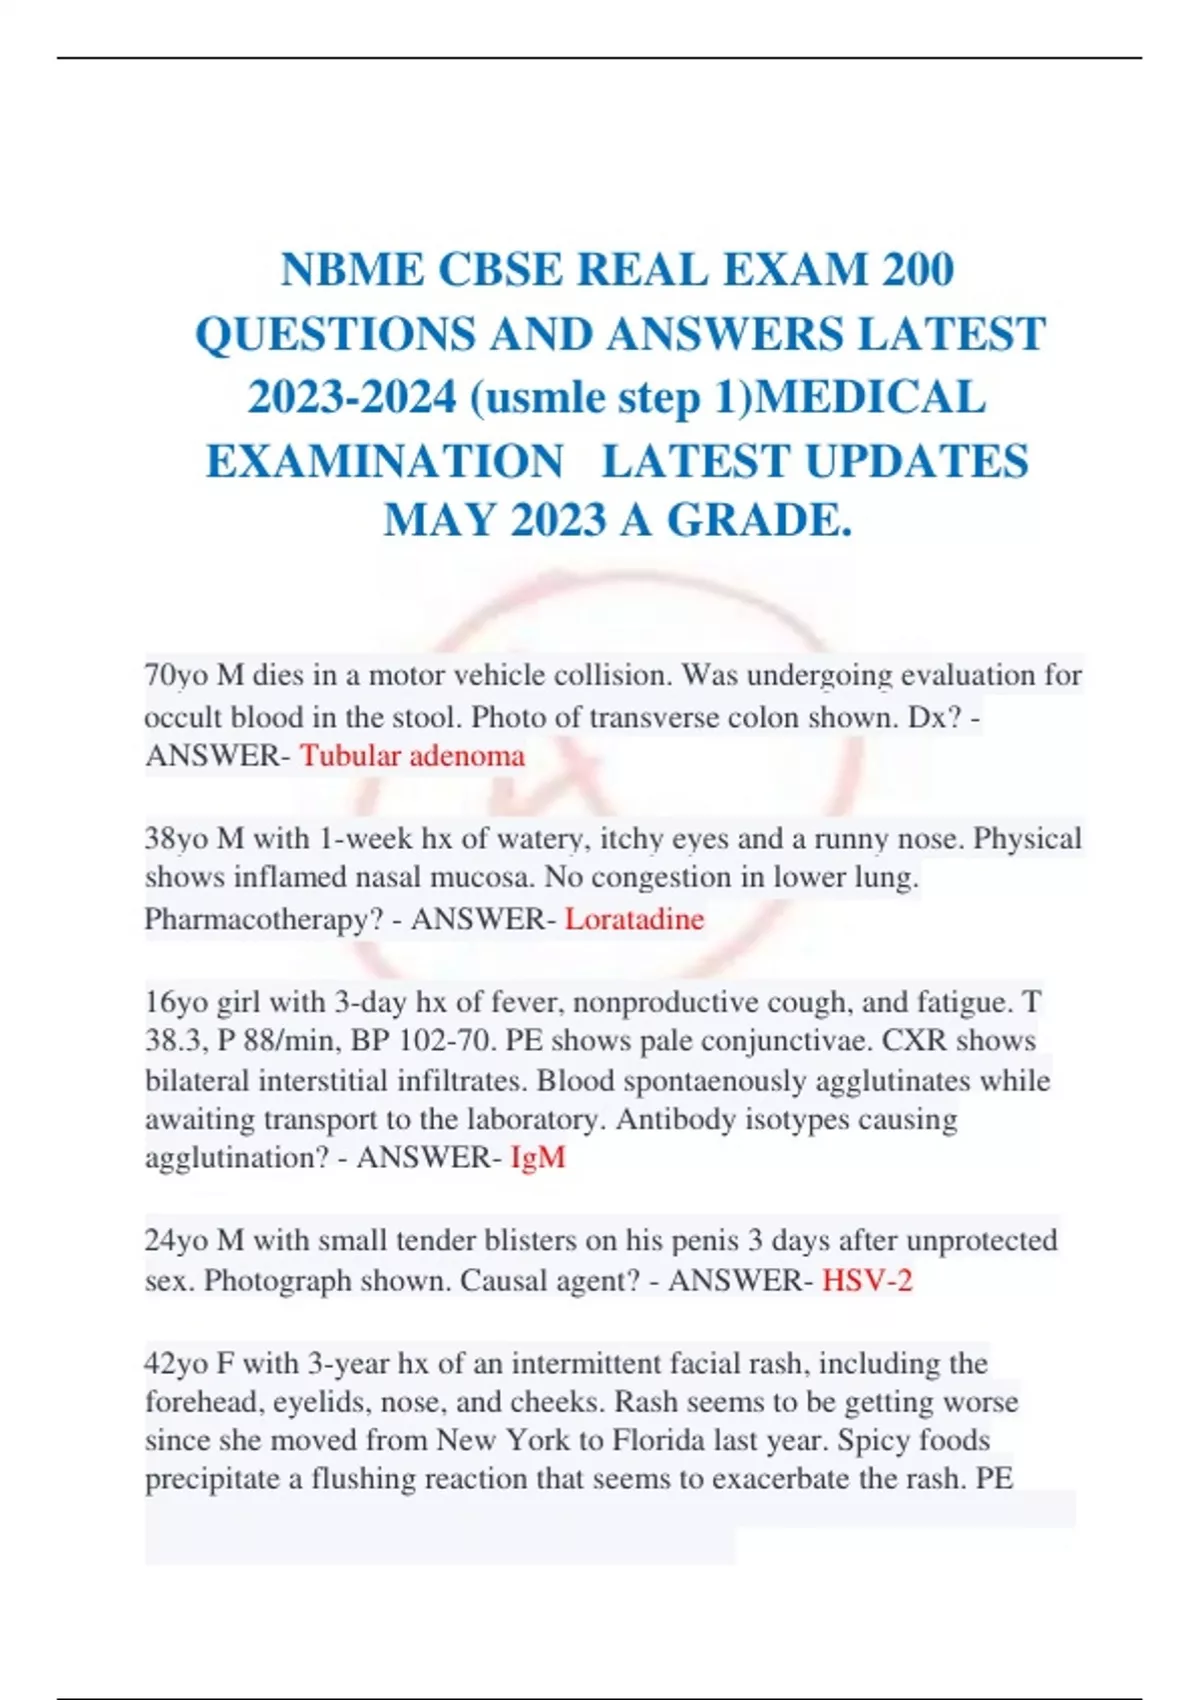 NBME CBSE REAL EXAM 200 QUESTIONS AND ANSWERS LATEST 20232024